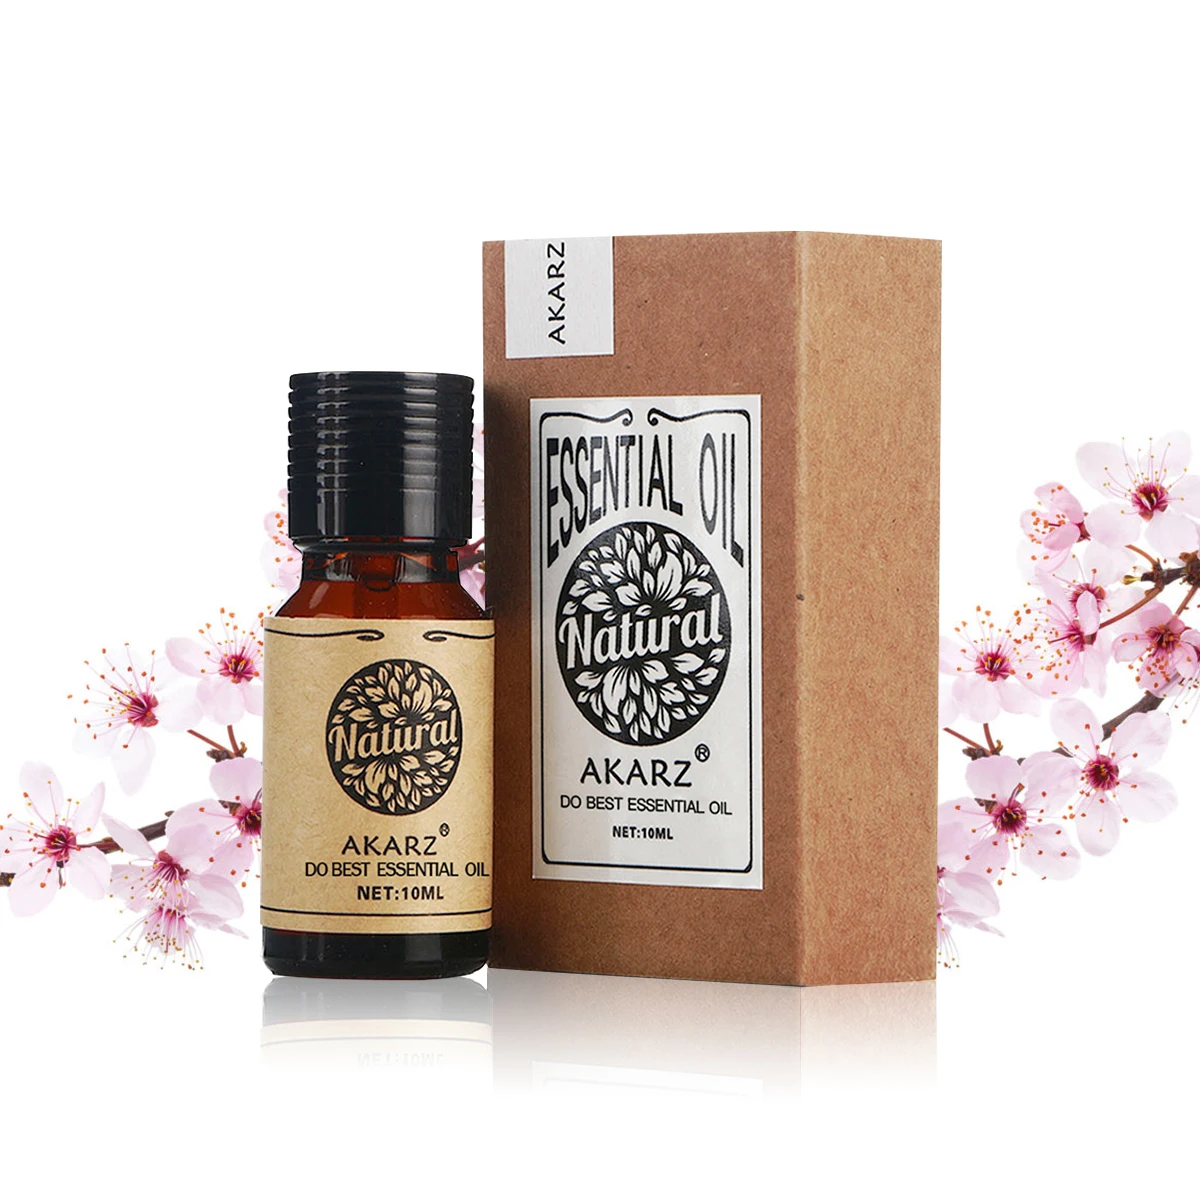 

Cherry Blossom Essential Oil AKARZ Natural Aromatic for Aromatherapy Body Skin Care Aroma 10ml 30ml 100ml